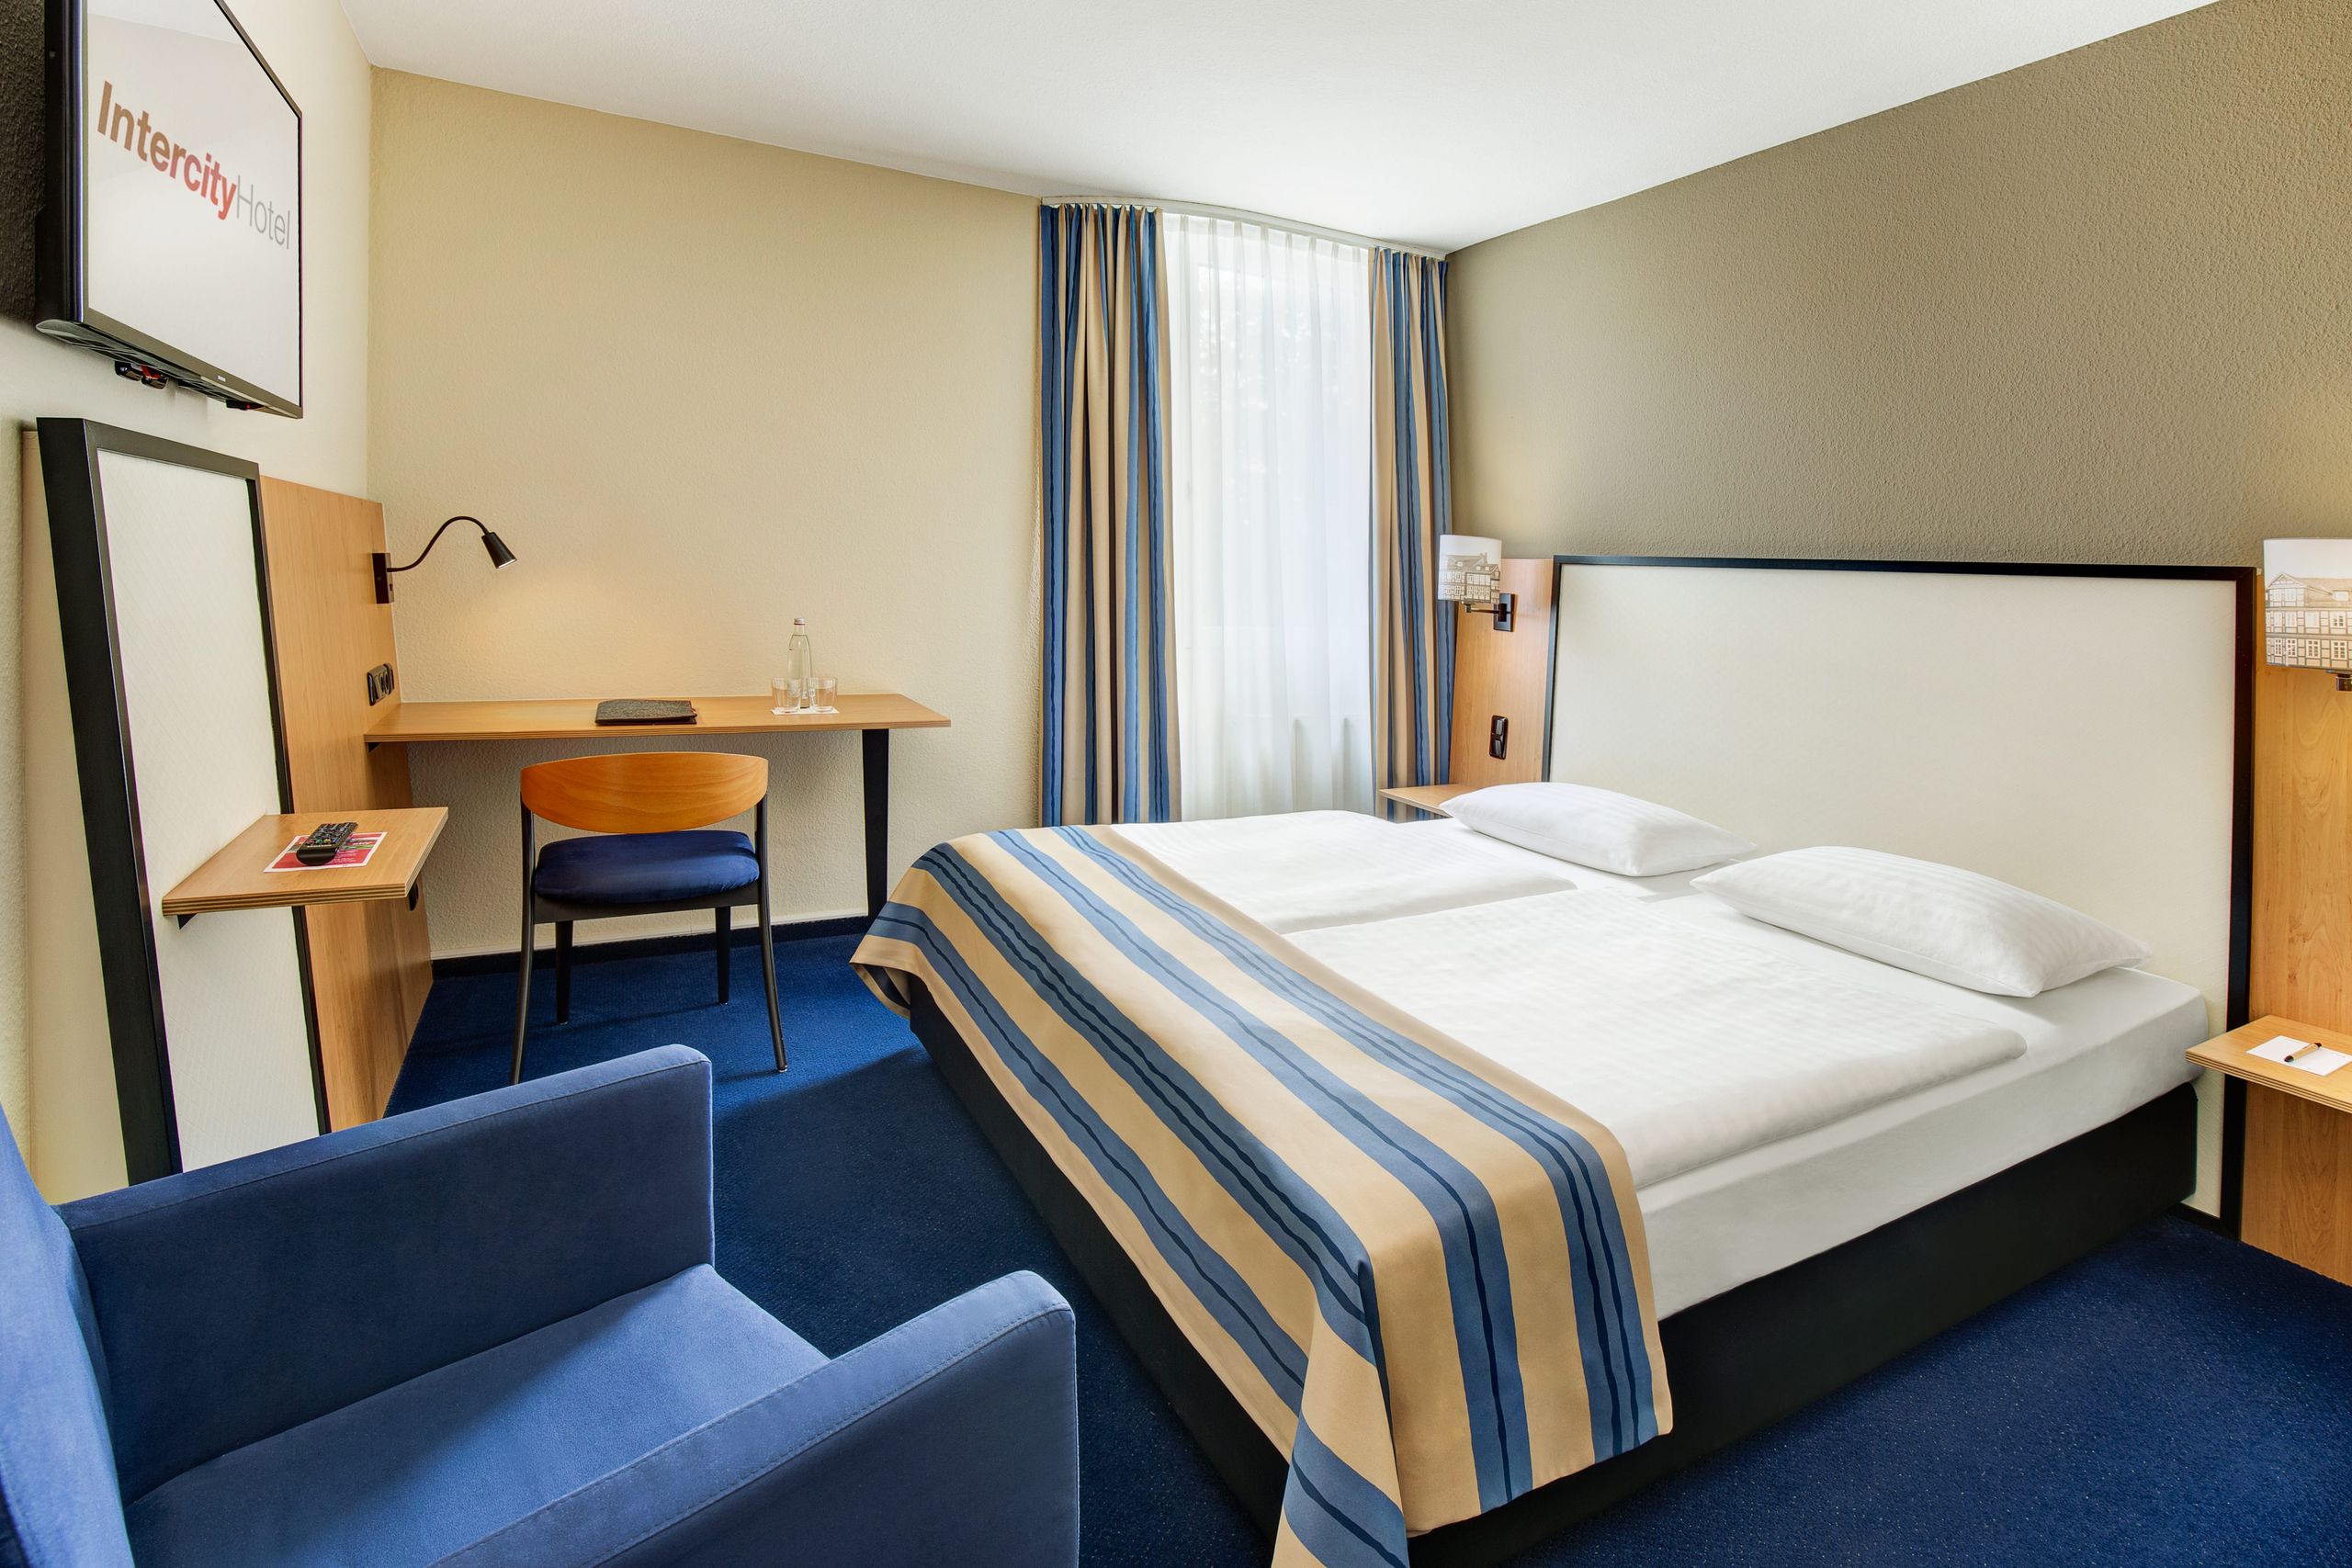 IntercityHotel Celle - Business room